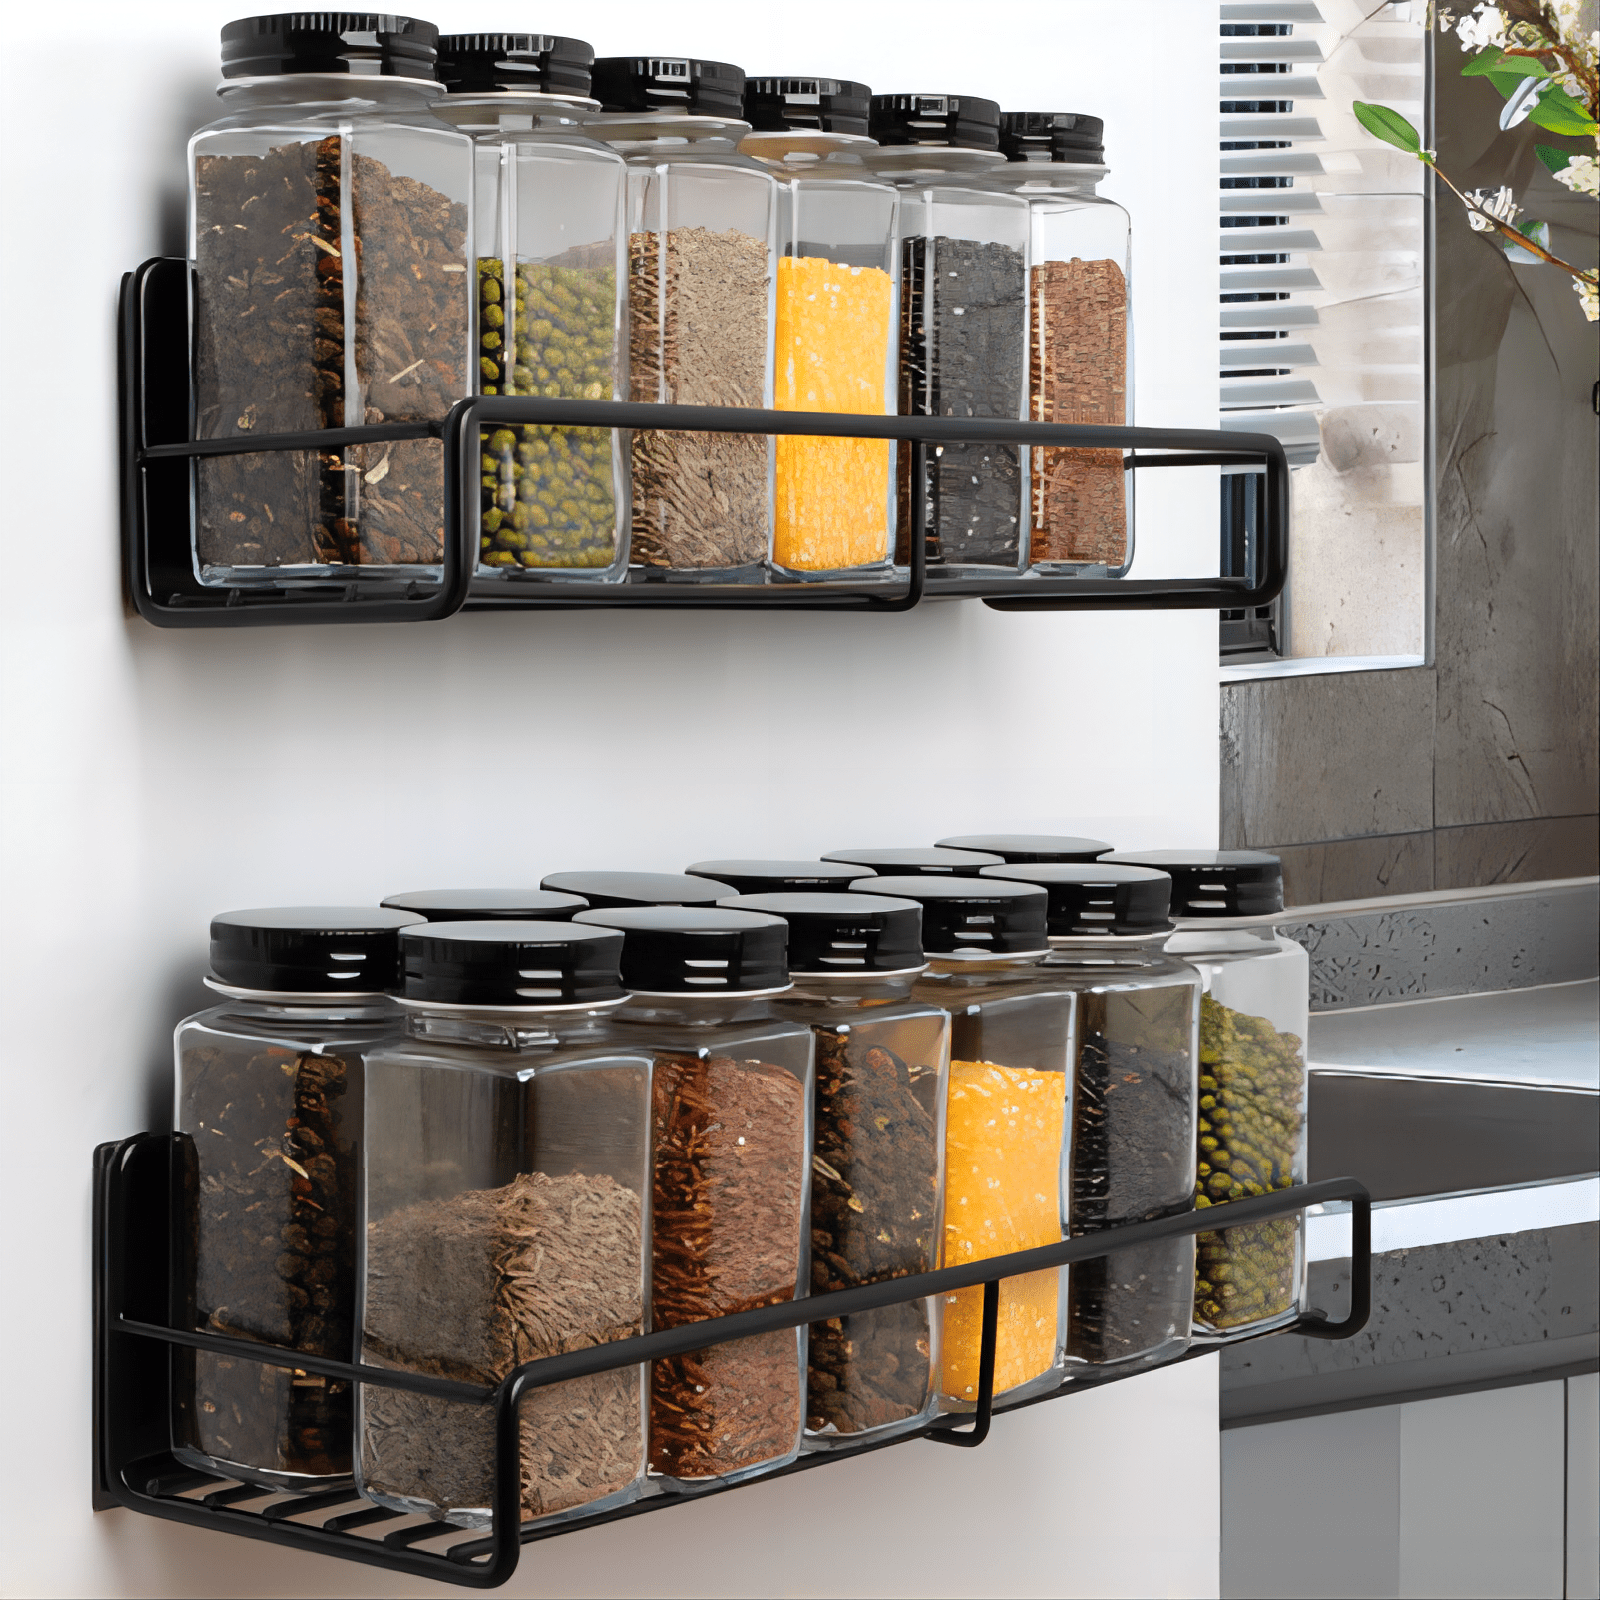  KitHero Magnetic Spice Rack Organizer with 12 Jars, 216 Labels,  1 Steel Funnel for Refrigerator，Microwave Oven - Full Set of Seasoning  Organizer, Kitchen Gadgets : Home & Kitchen